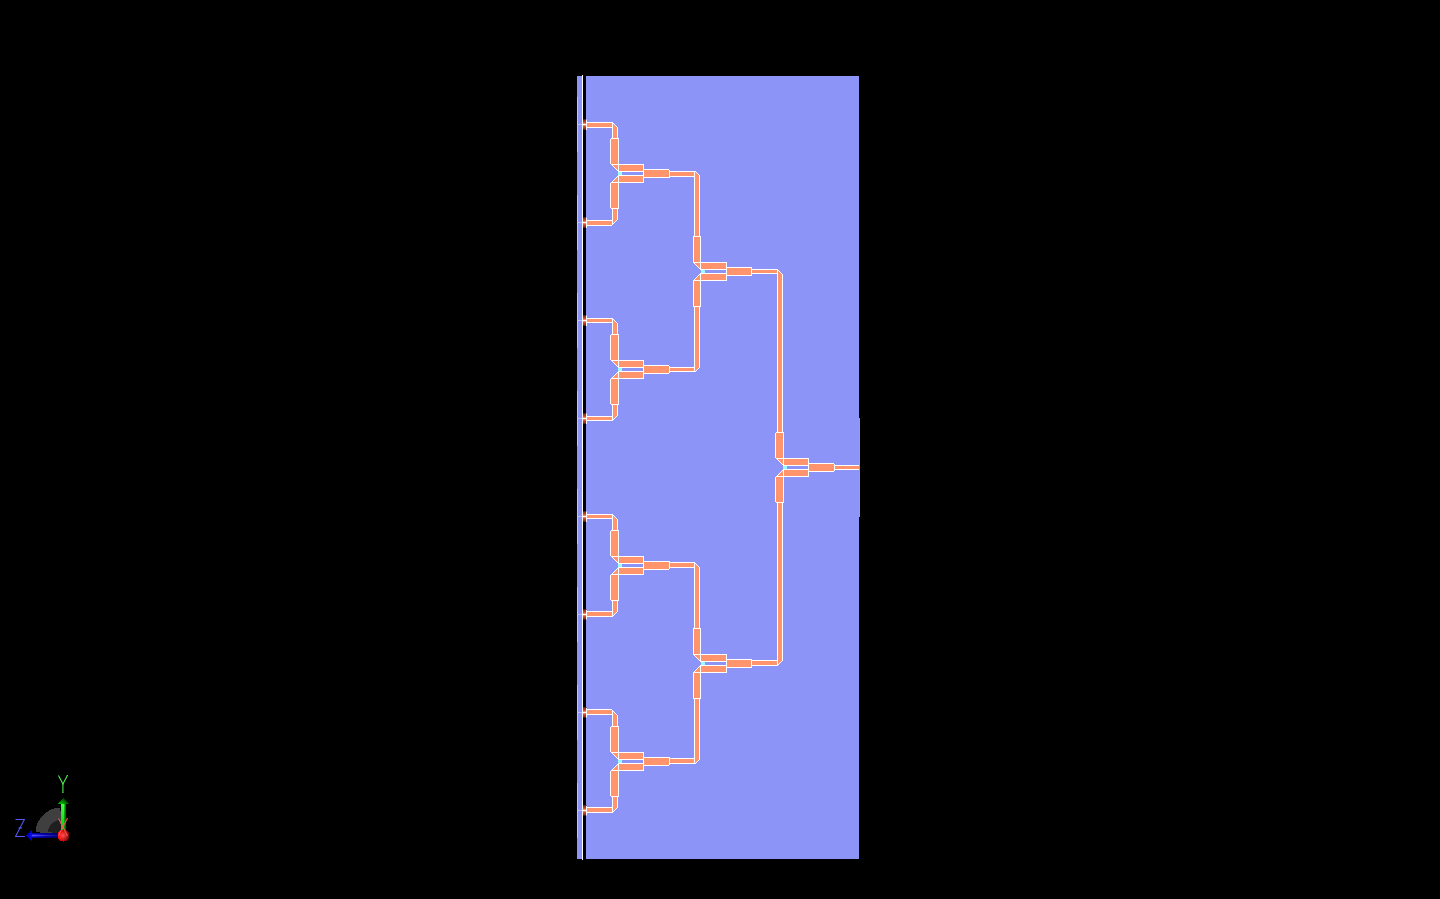 Figure 9: A side view of the Wilkinson power divider is shown which clearly displays the three stages of dividing the signal.